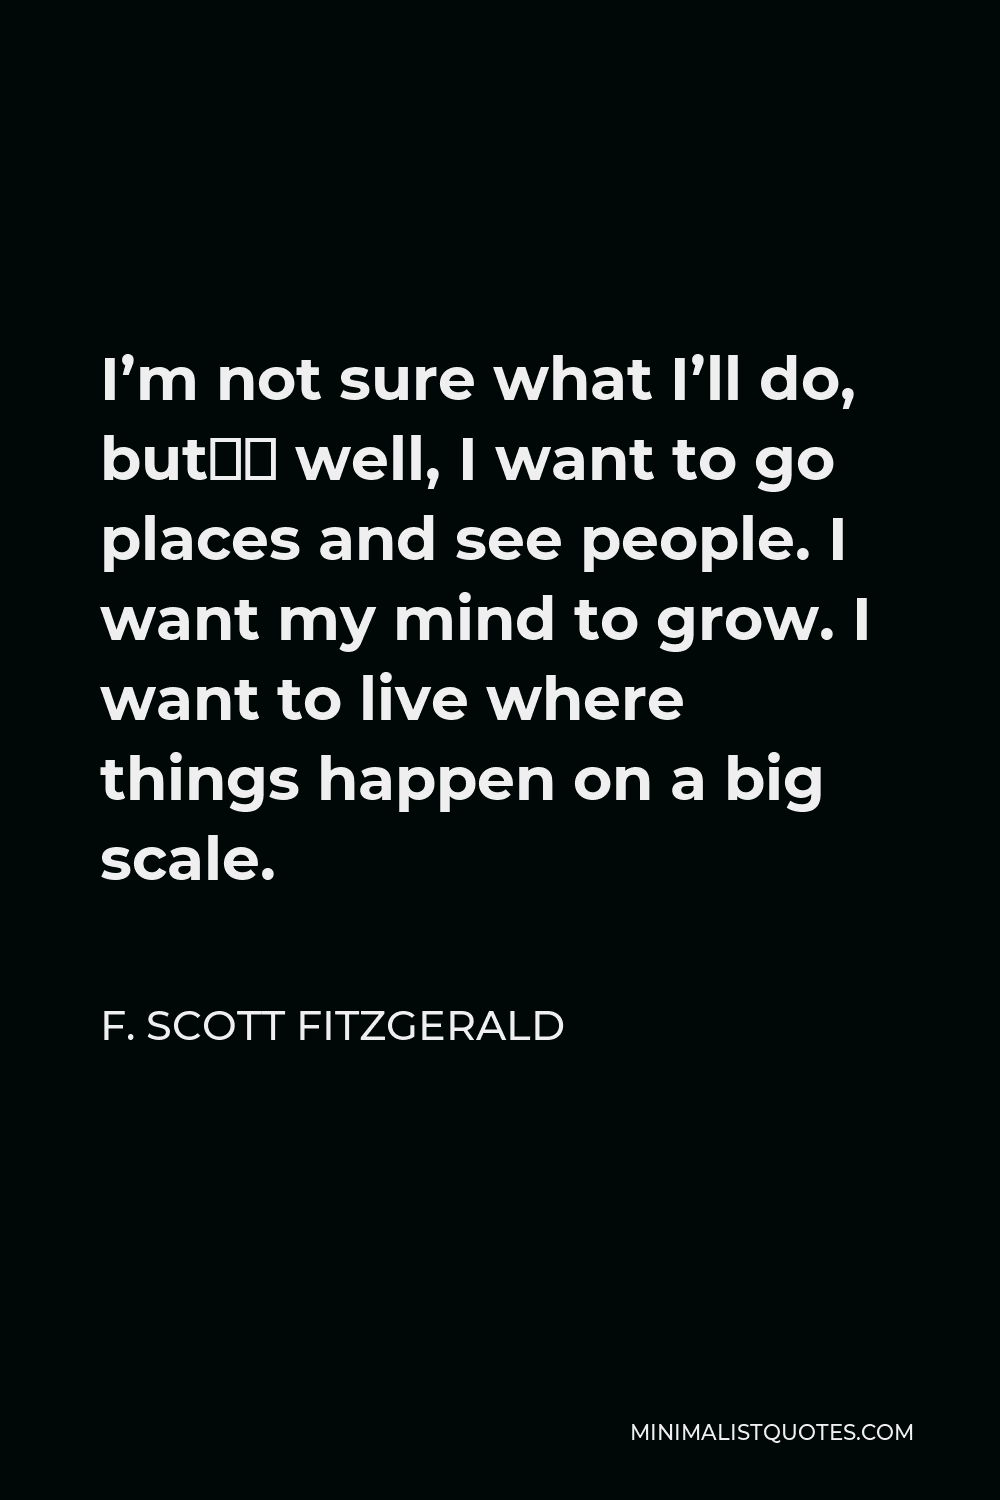 F. Scott Fitzgerald Quote - I’m not sure what I’ll do, but— well, I want to go places and see people. I want my mind to grow. I want to live where things happen on a big scale.